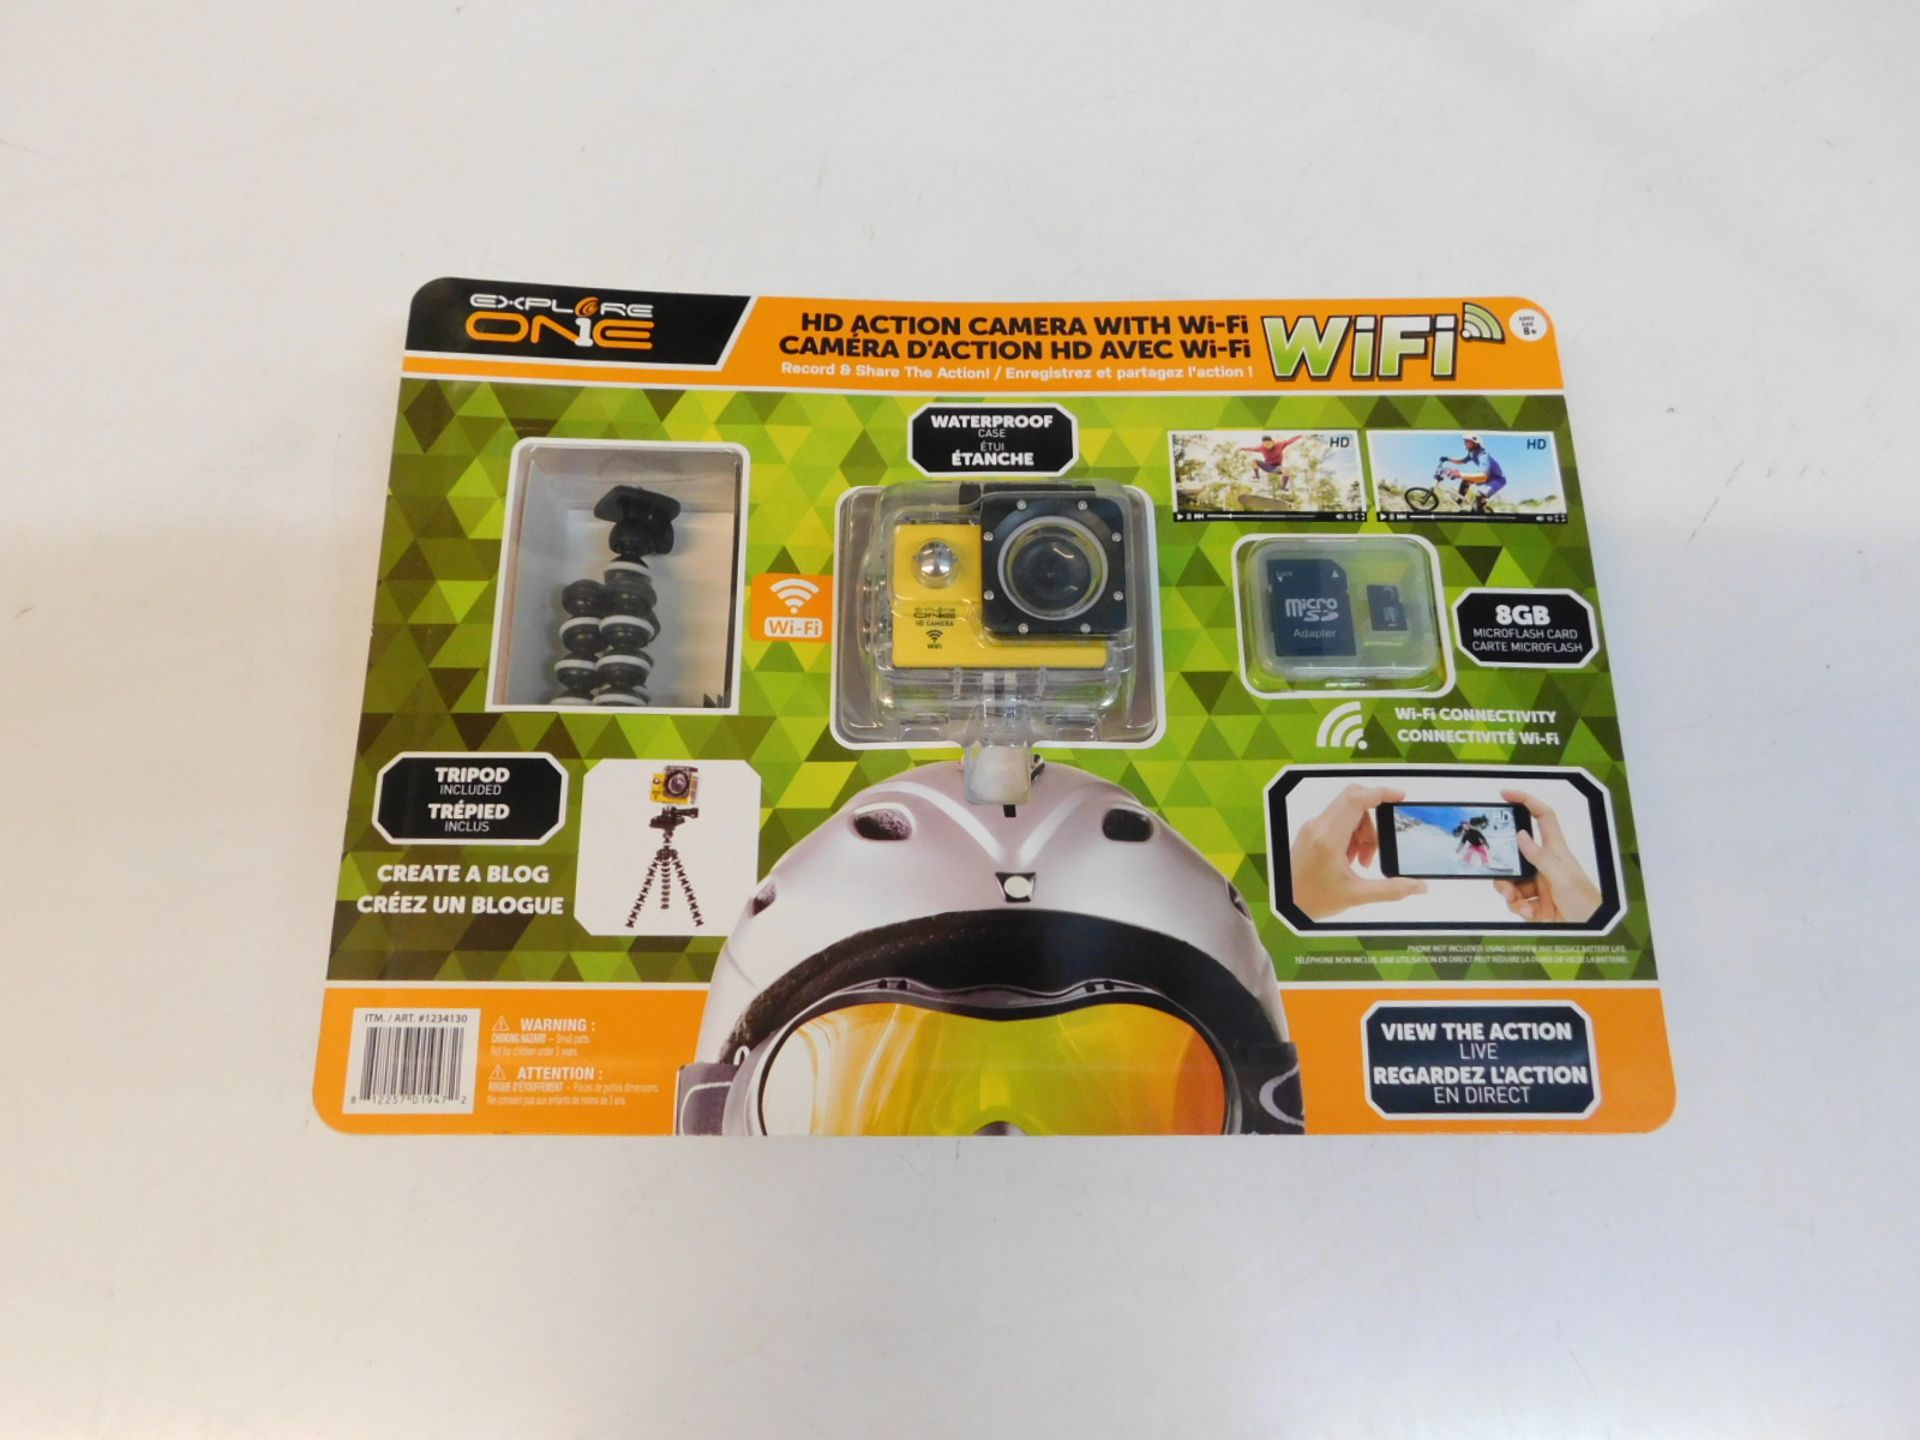 1 BRAND NEW PACK OF EXPLORE 1 HD ACTION CAMERA WITH WIFI RRP £29.99